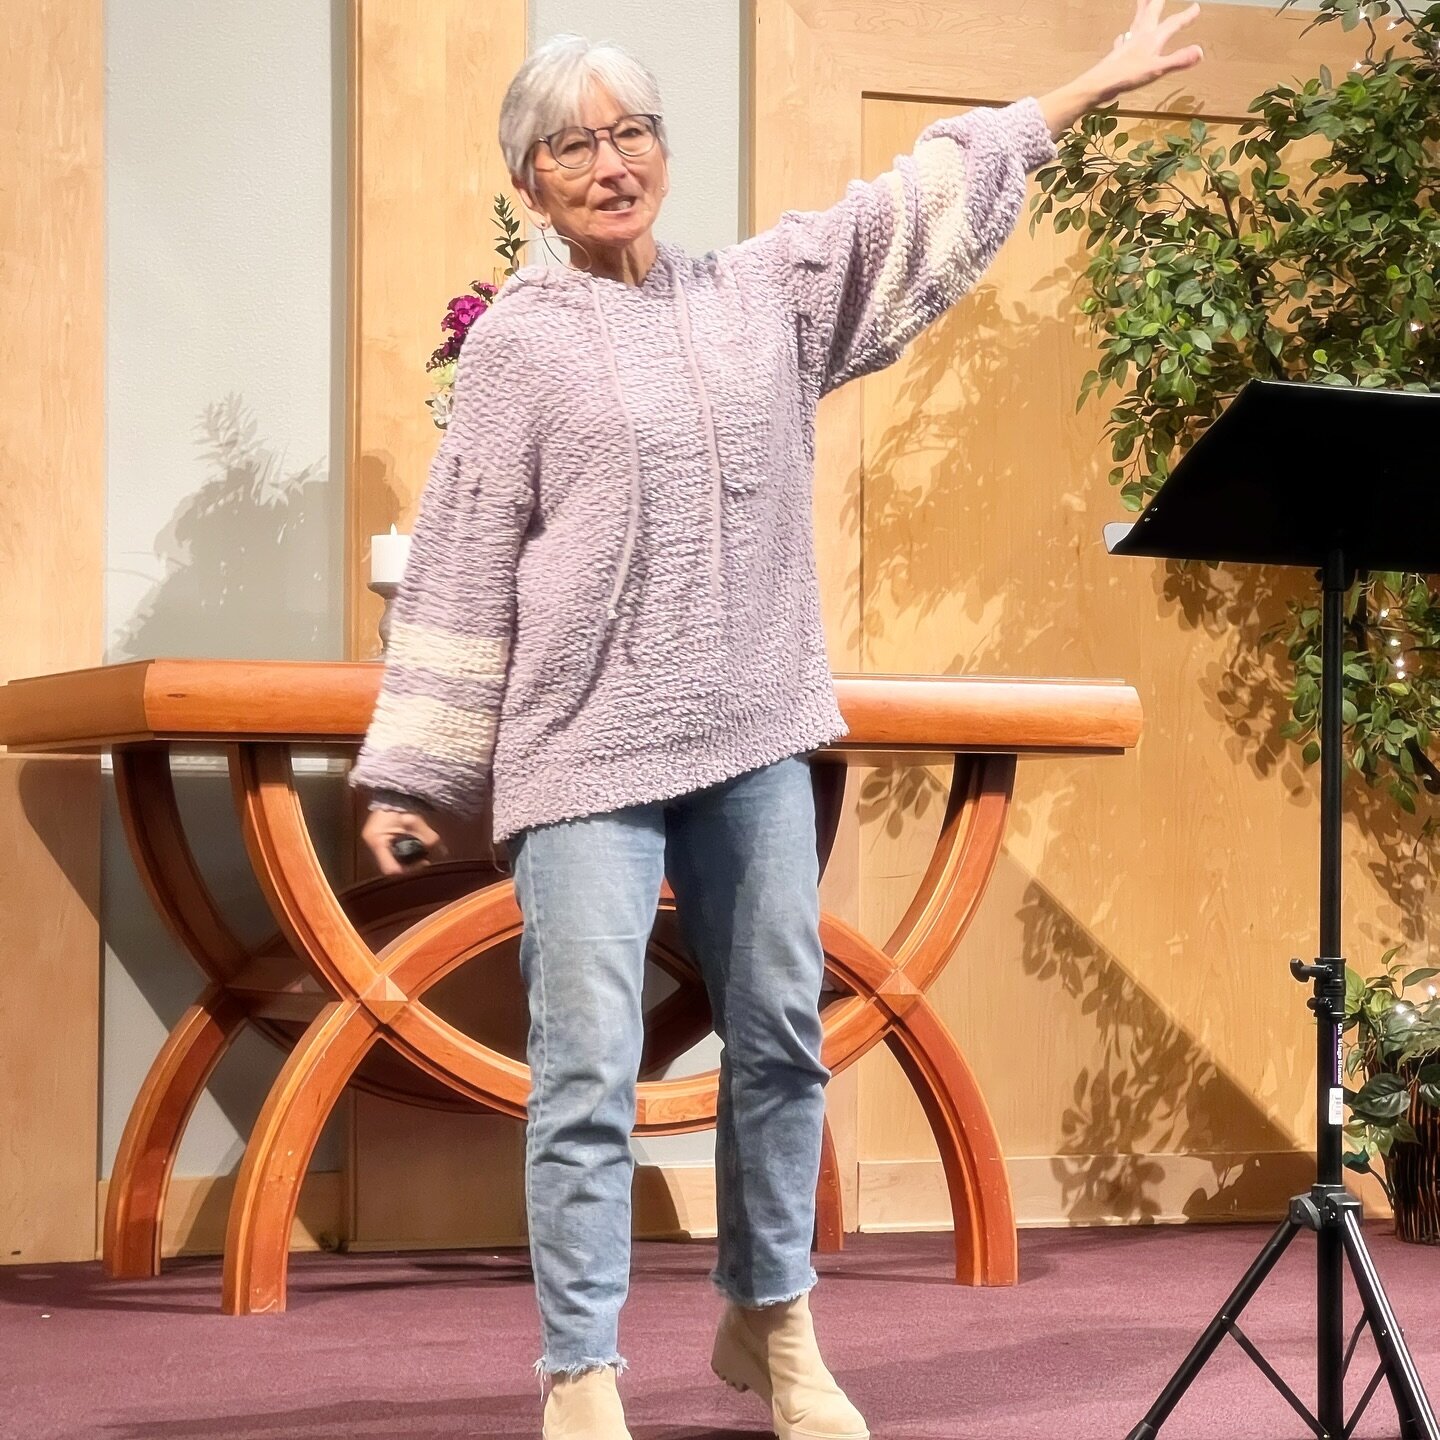 The morning began with a powerful time of worship by Lisa and Wendy. Nicole recited Romans 12 from memory and then Patty walked us boldly through Romans 12. The Holy Spirit was present and alive today.

If you were unable to join us, the message is o